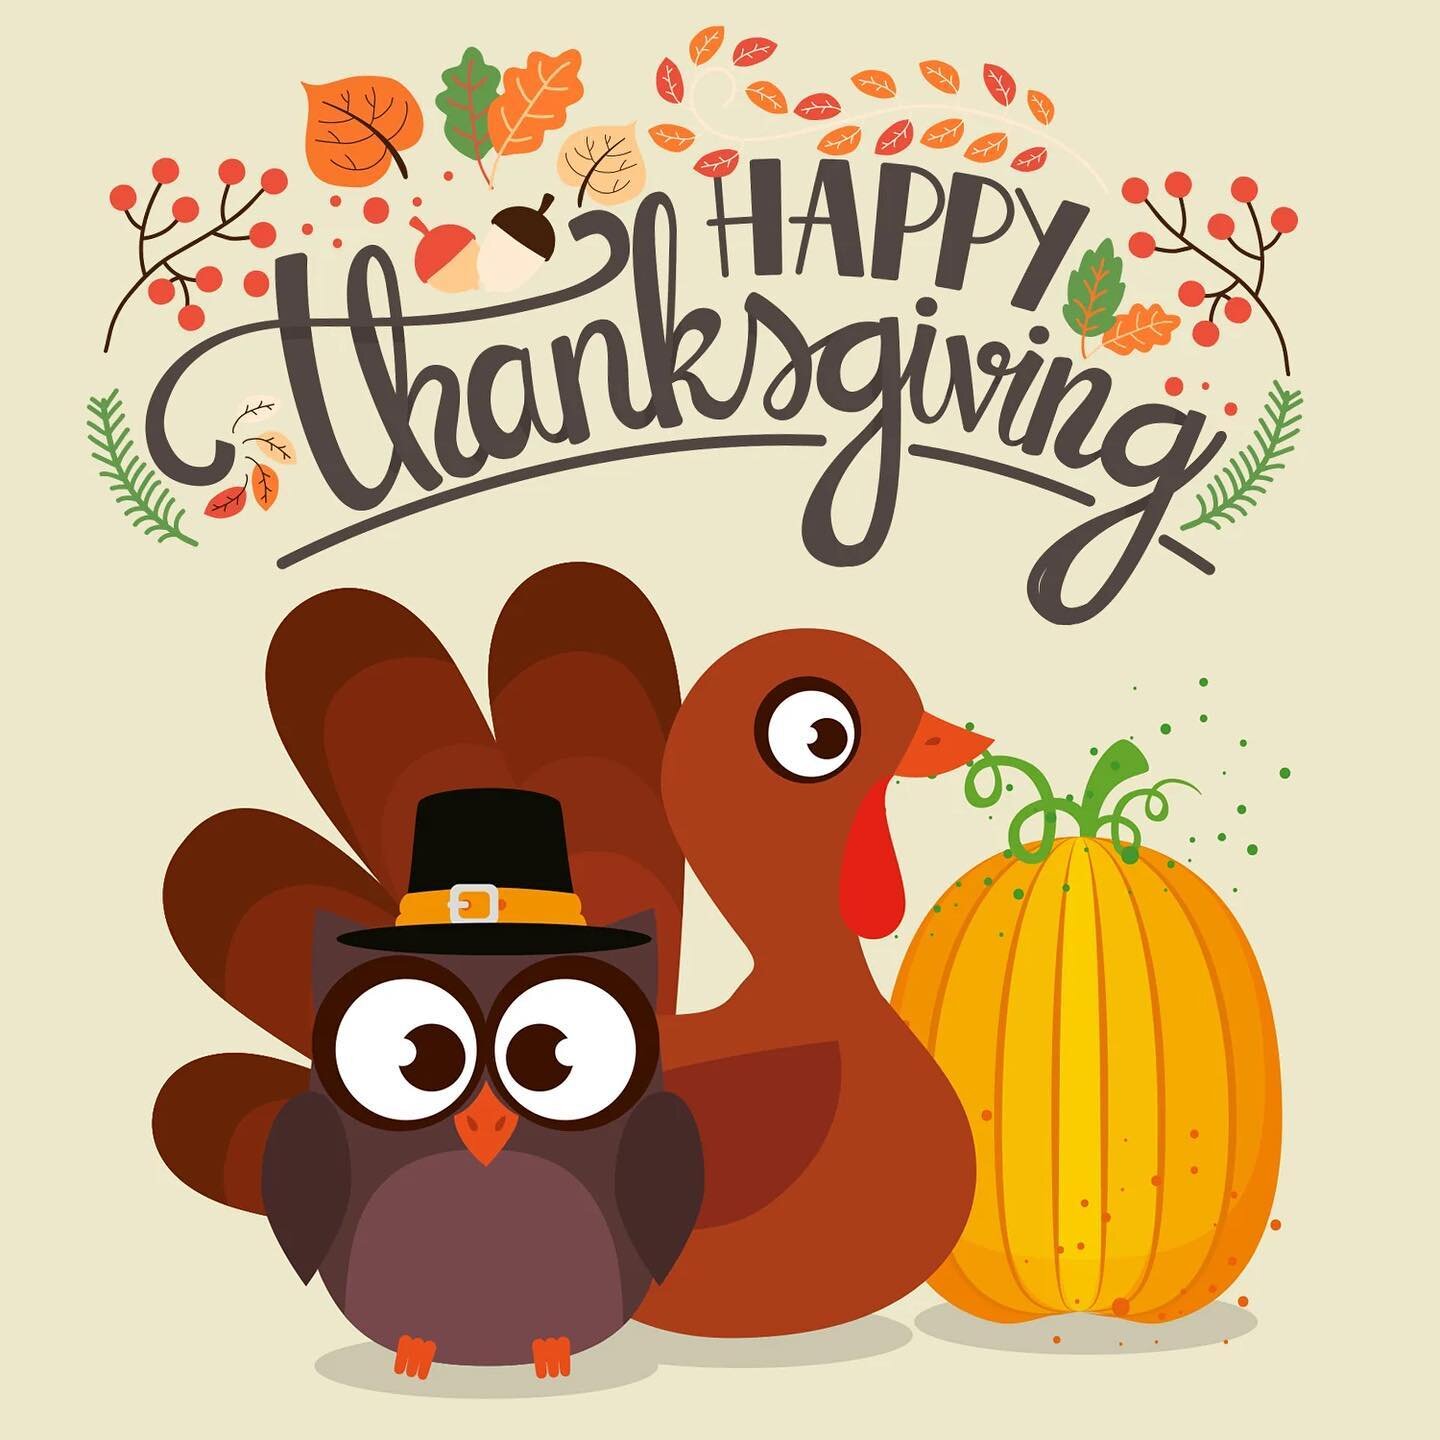 Wishing you and yours a very Happy Thanksgiving!!!